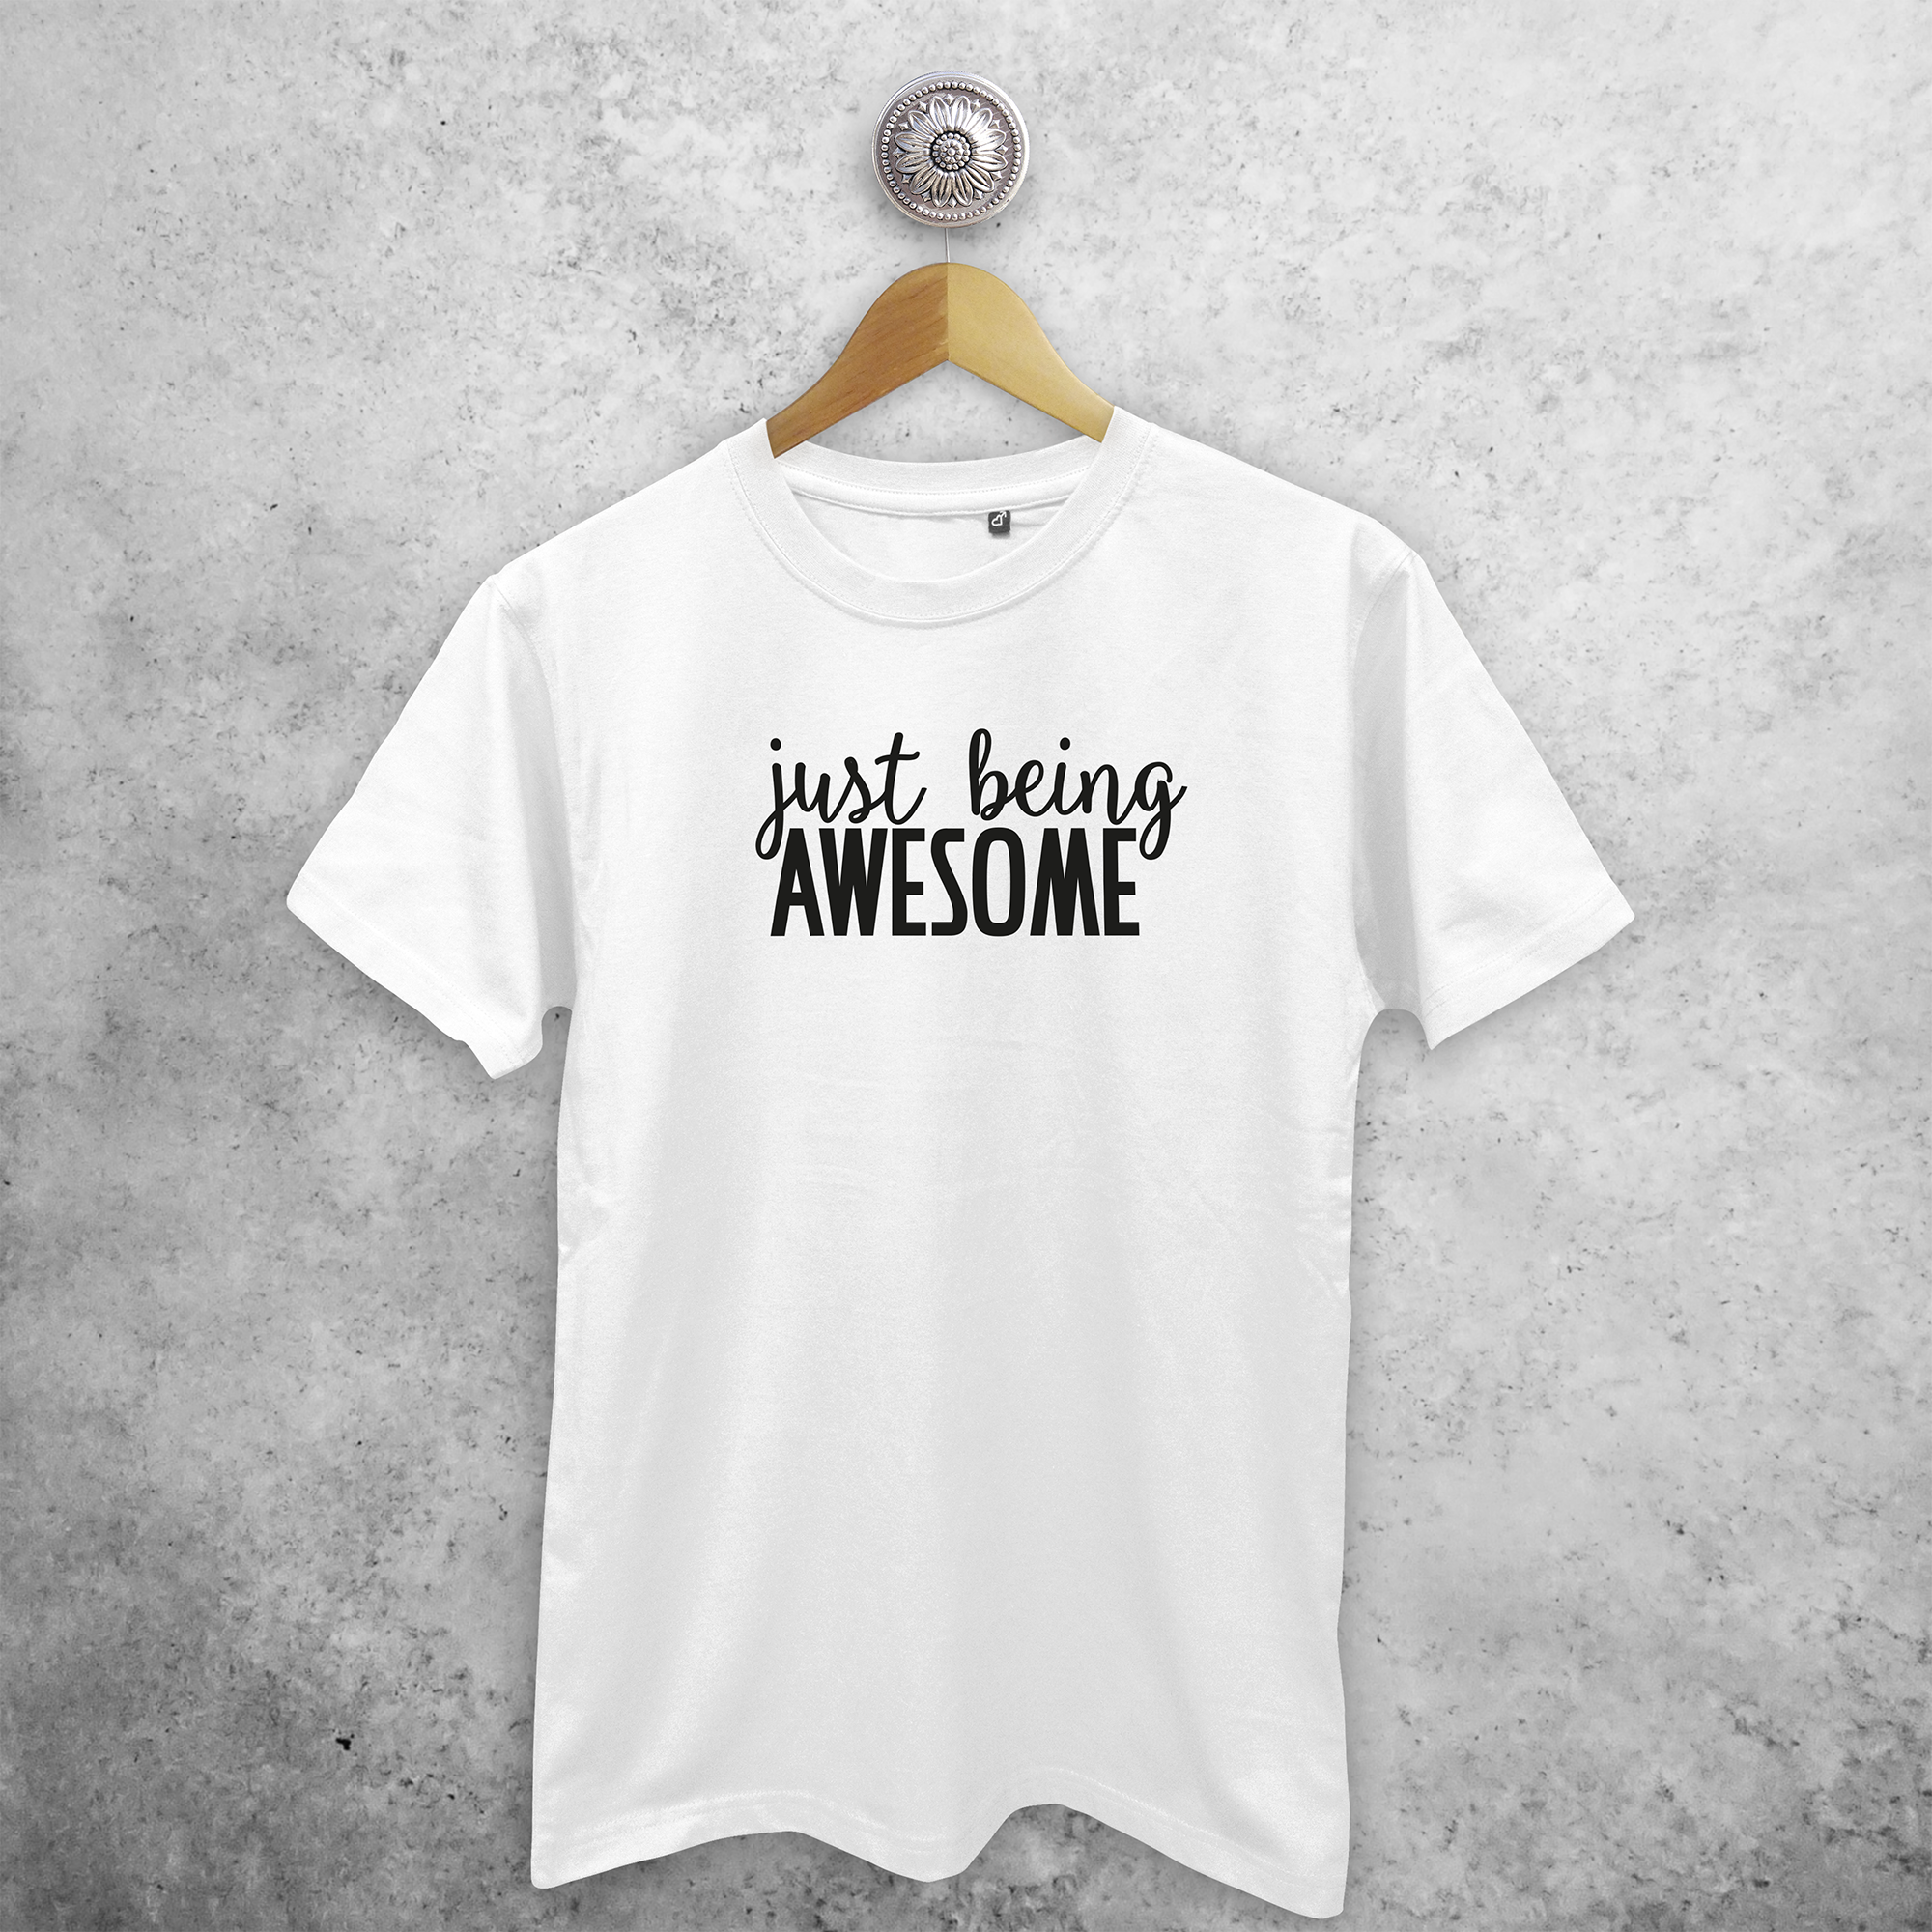 'Just being awesome' volwassene shirt